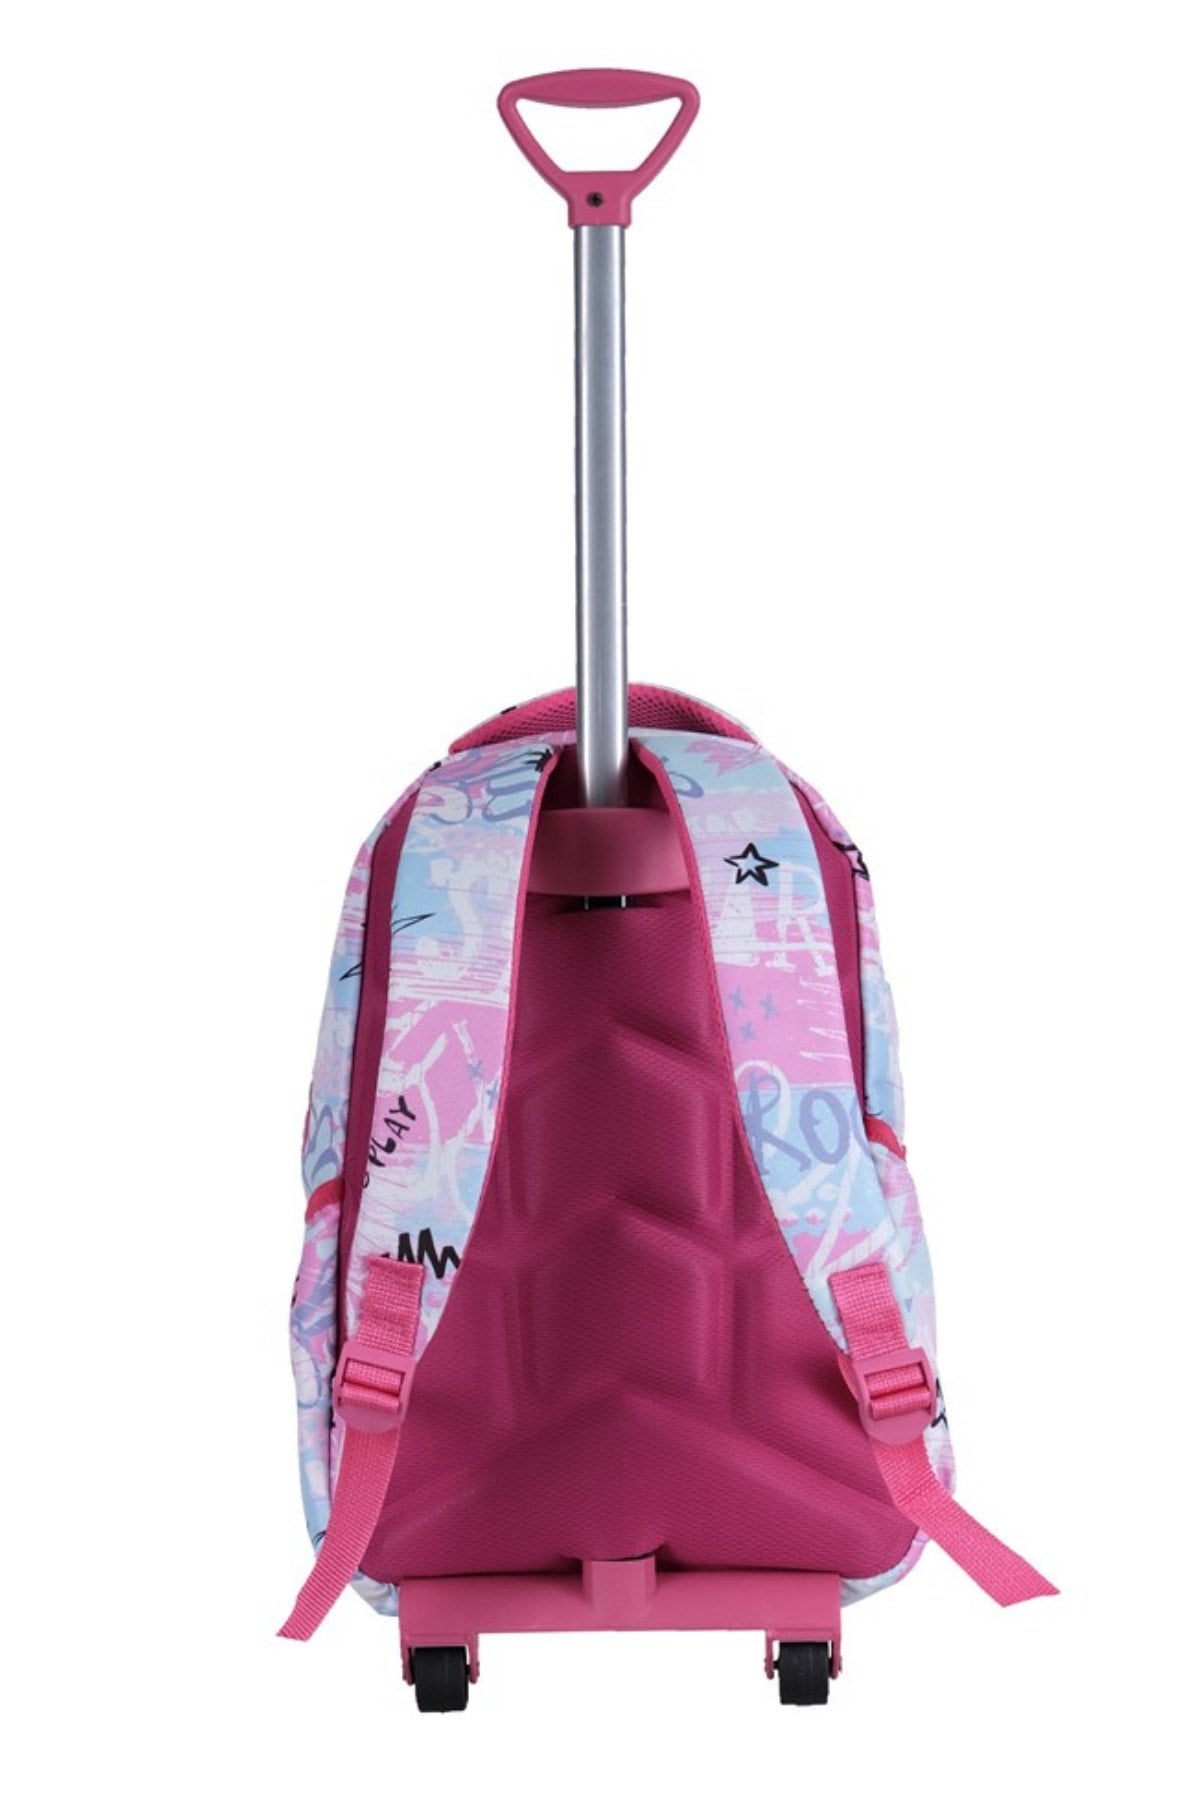 3-pack School Set with Squeegee, Color Patterned Primary School Bag + Lunch Box + Pencil Holder